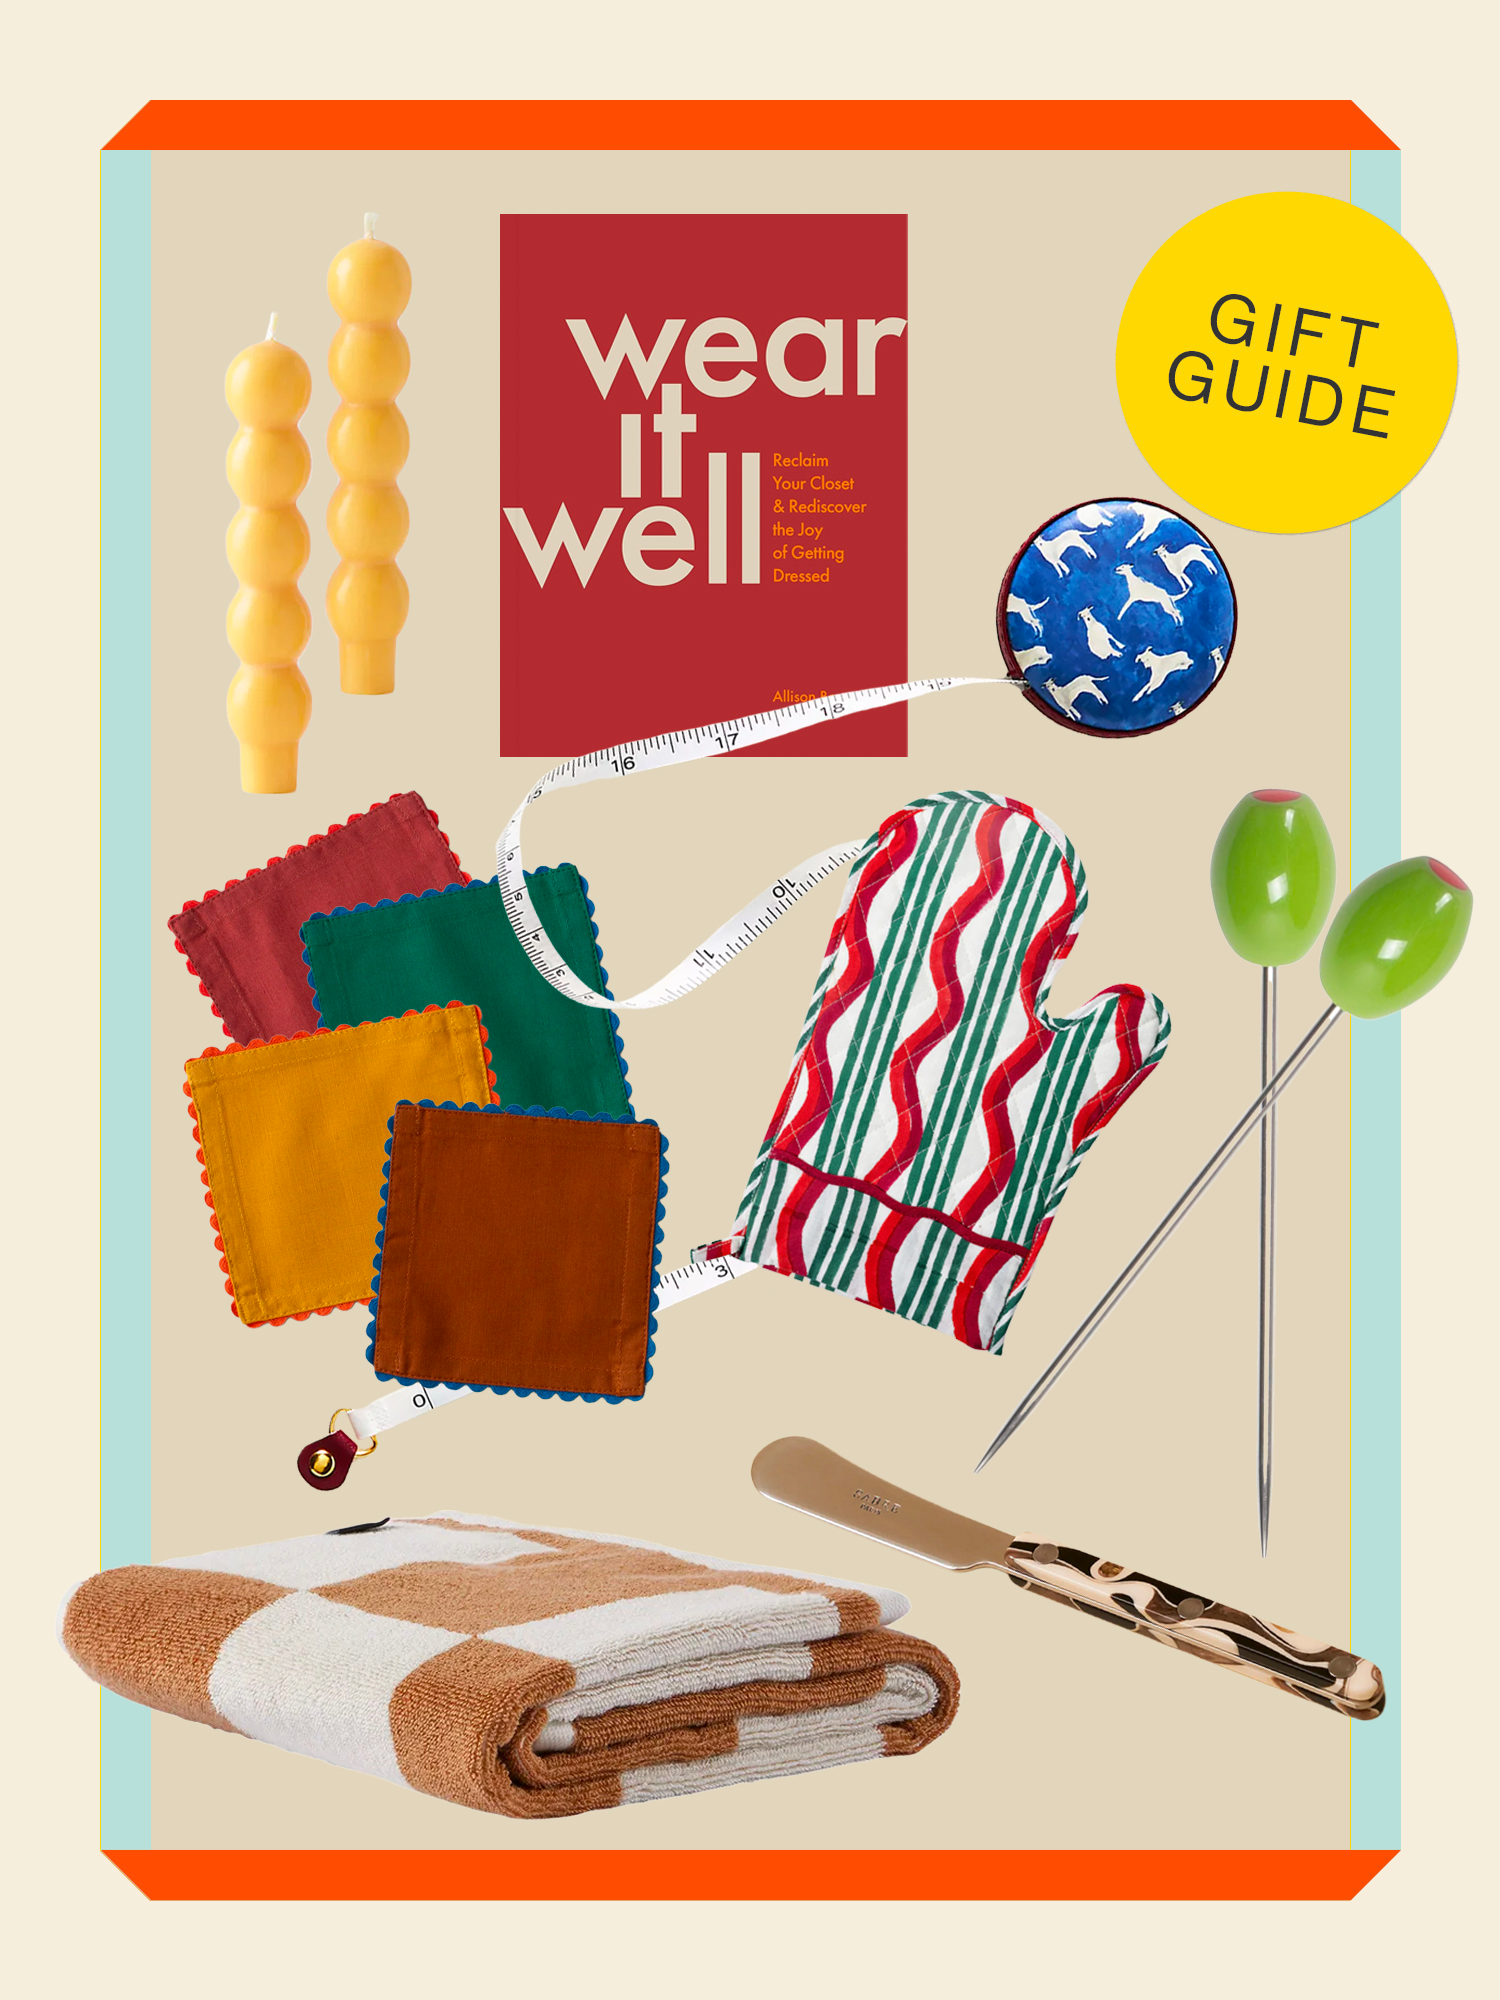 under $25 gift collage featuring olive cocktail picks, tapers, and more with gift guide button.